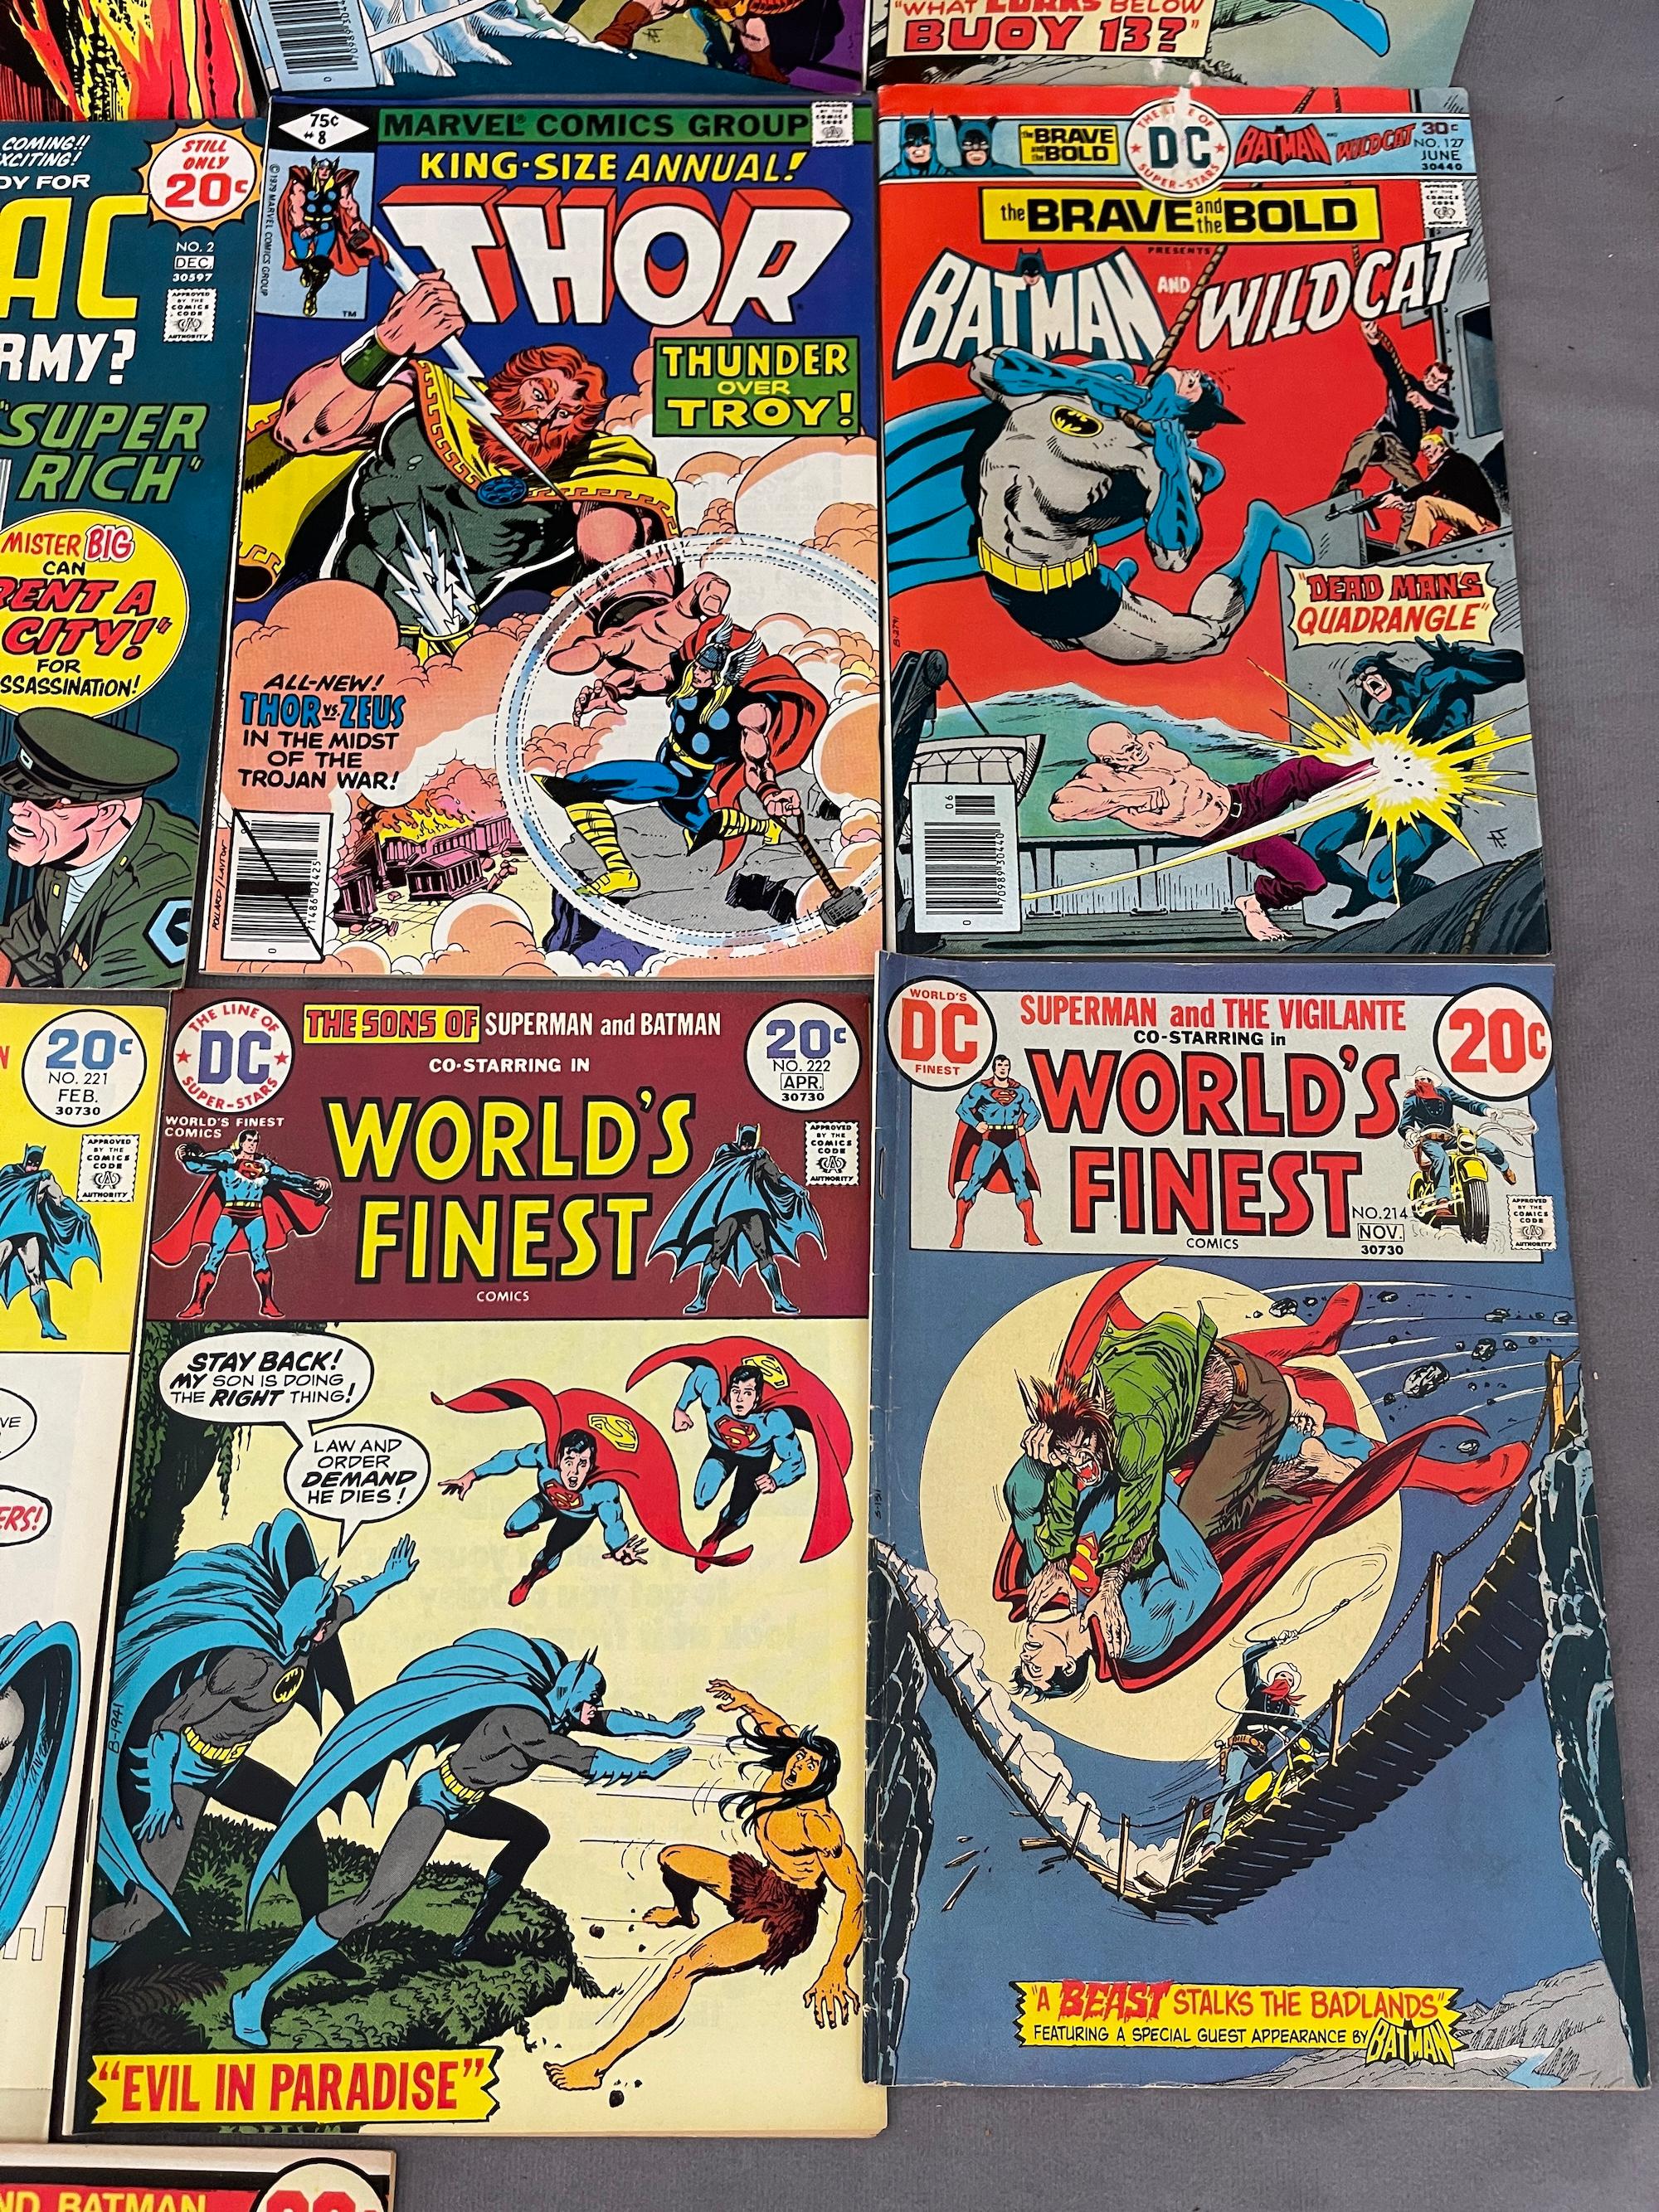 VINTAGE COMIC BOOK COLLECTION TOR AND WORLDS FINEST BATMAN DC COMICS LOT 22